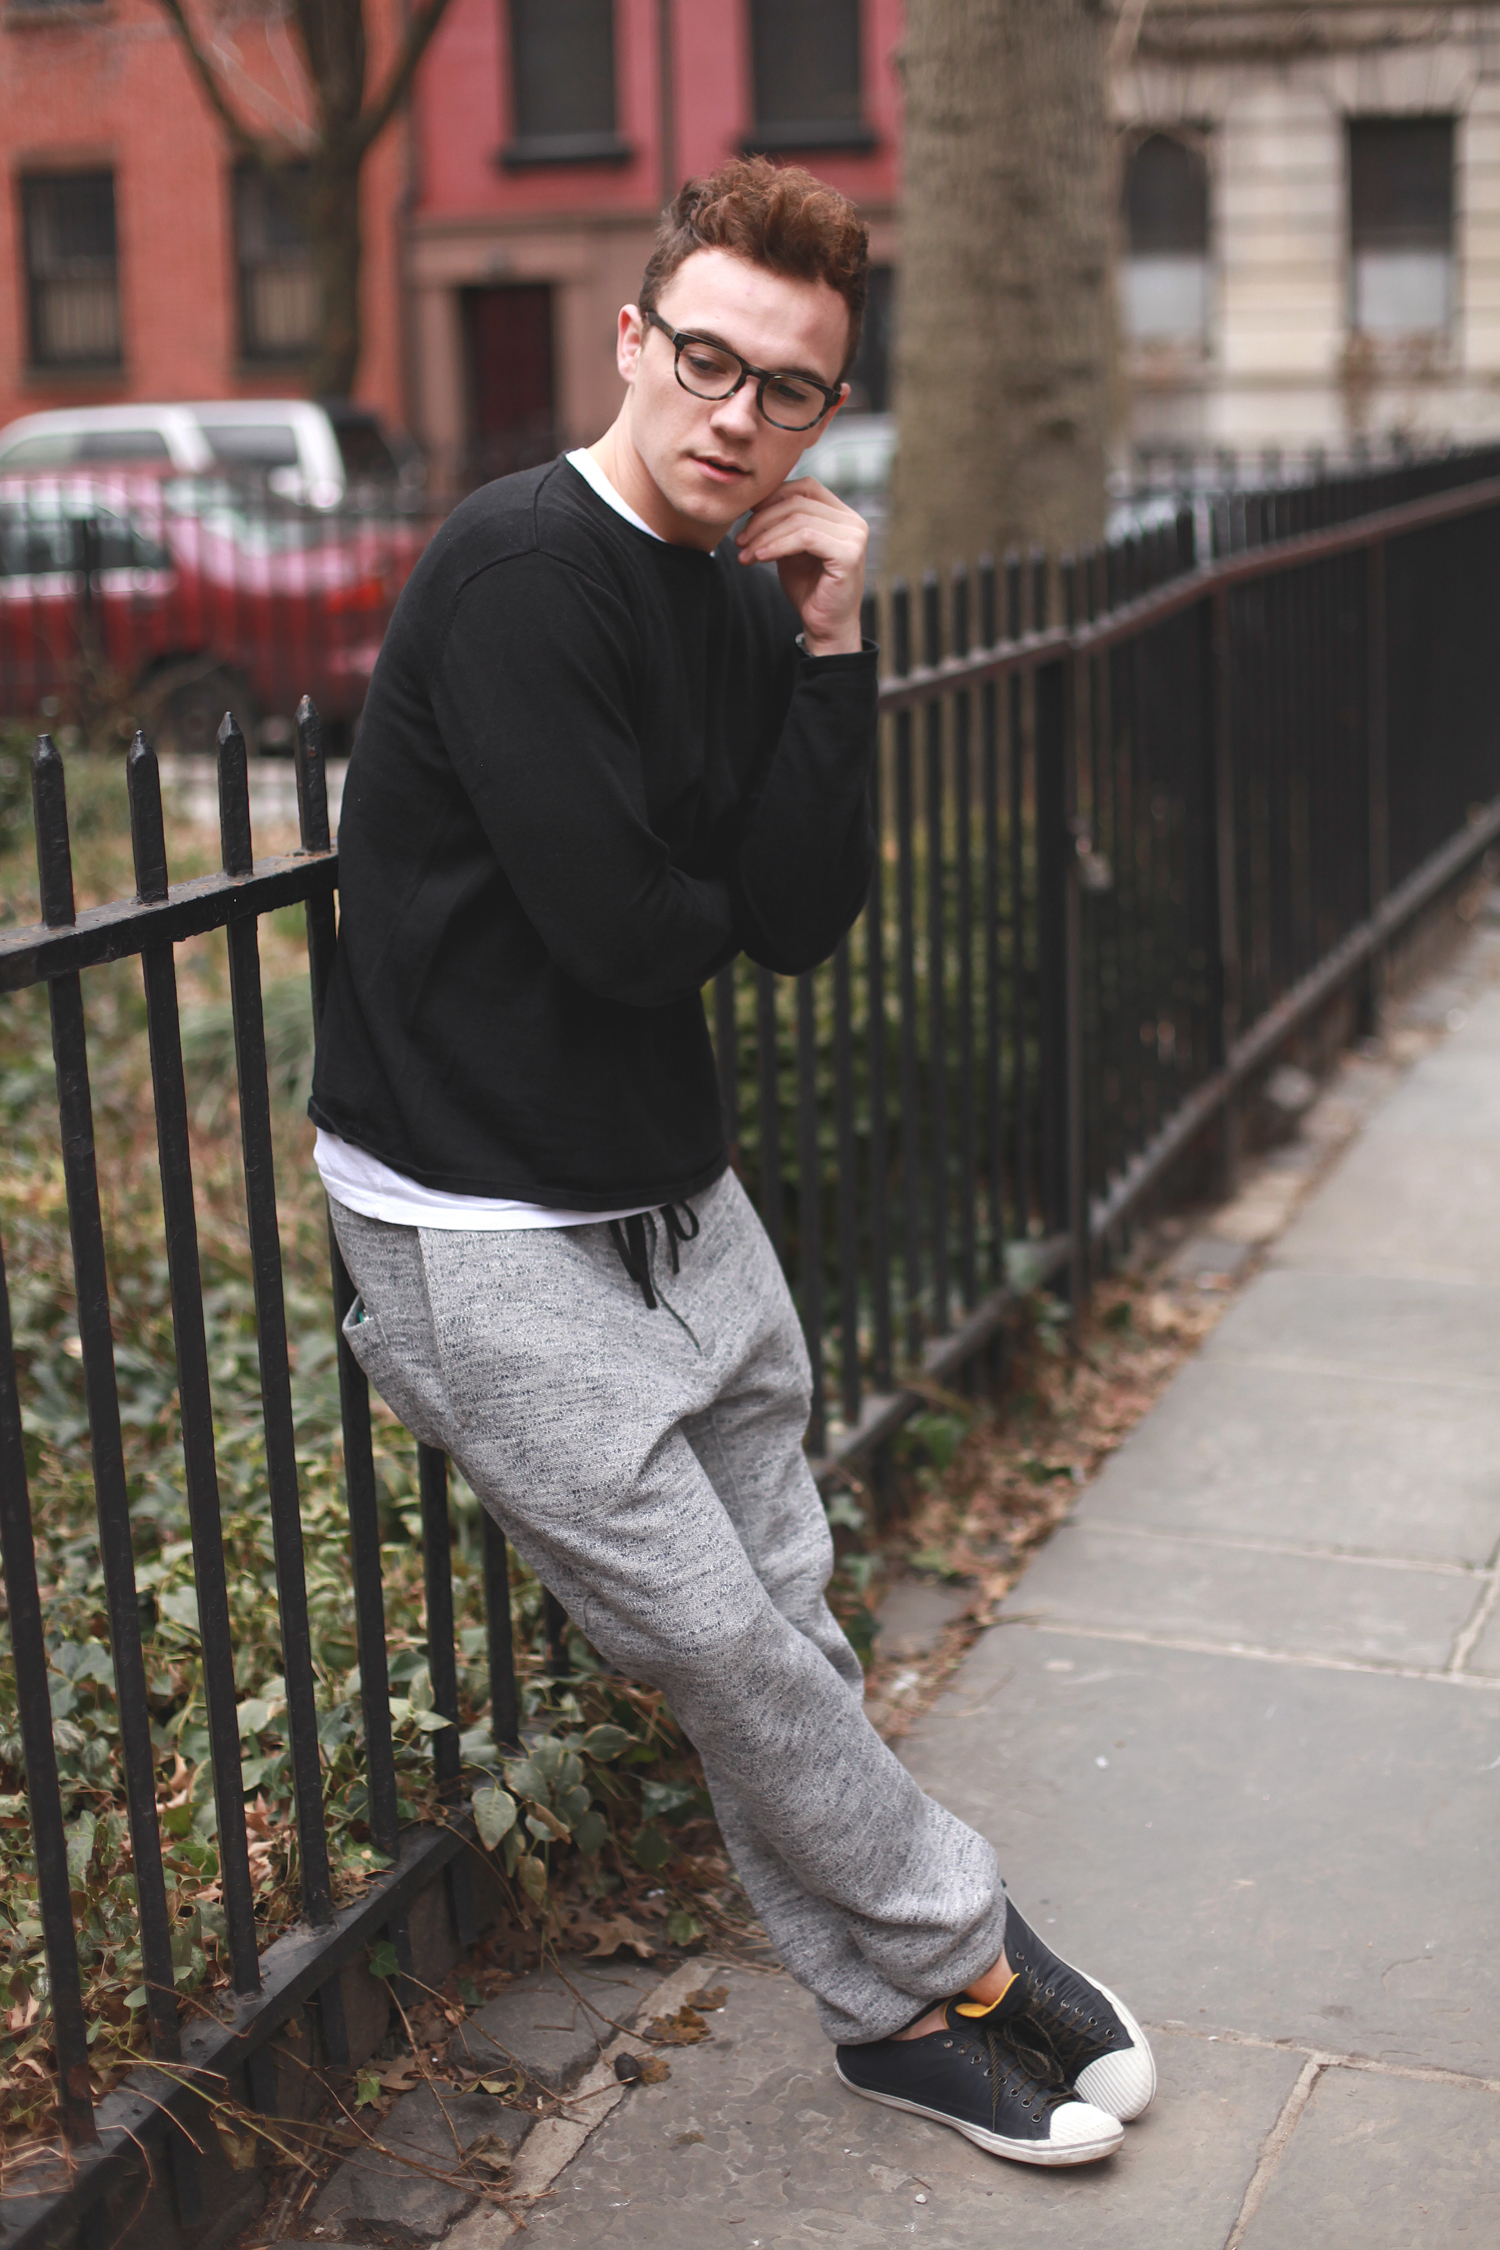 New York Men's Fashion Blog - Scout Sixteen / Isaora Sweatpants, Tretorn Sneakers, Warby Parker Glasses